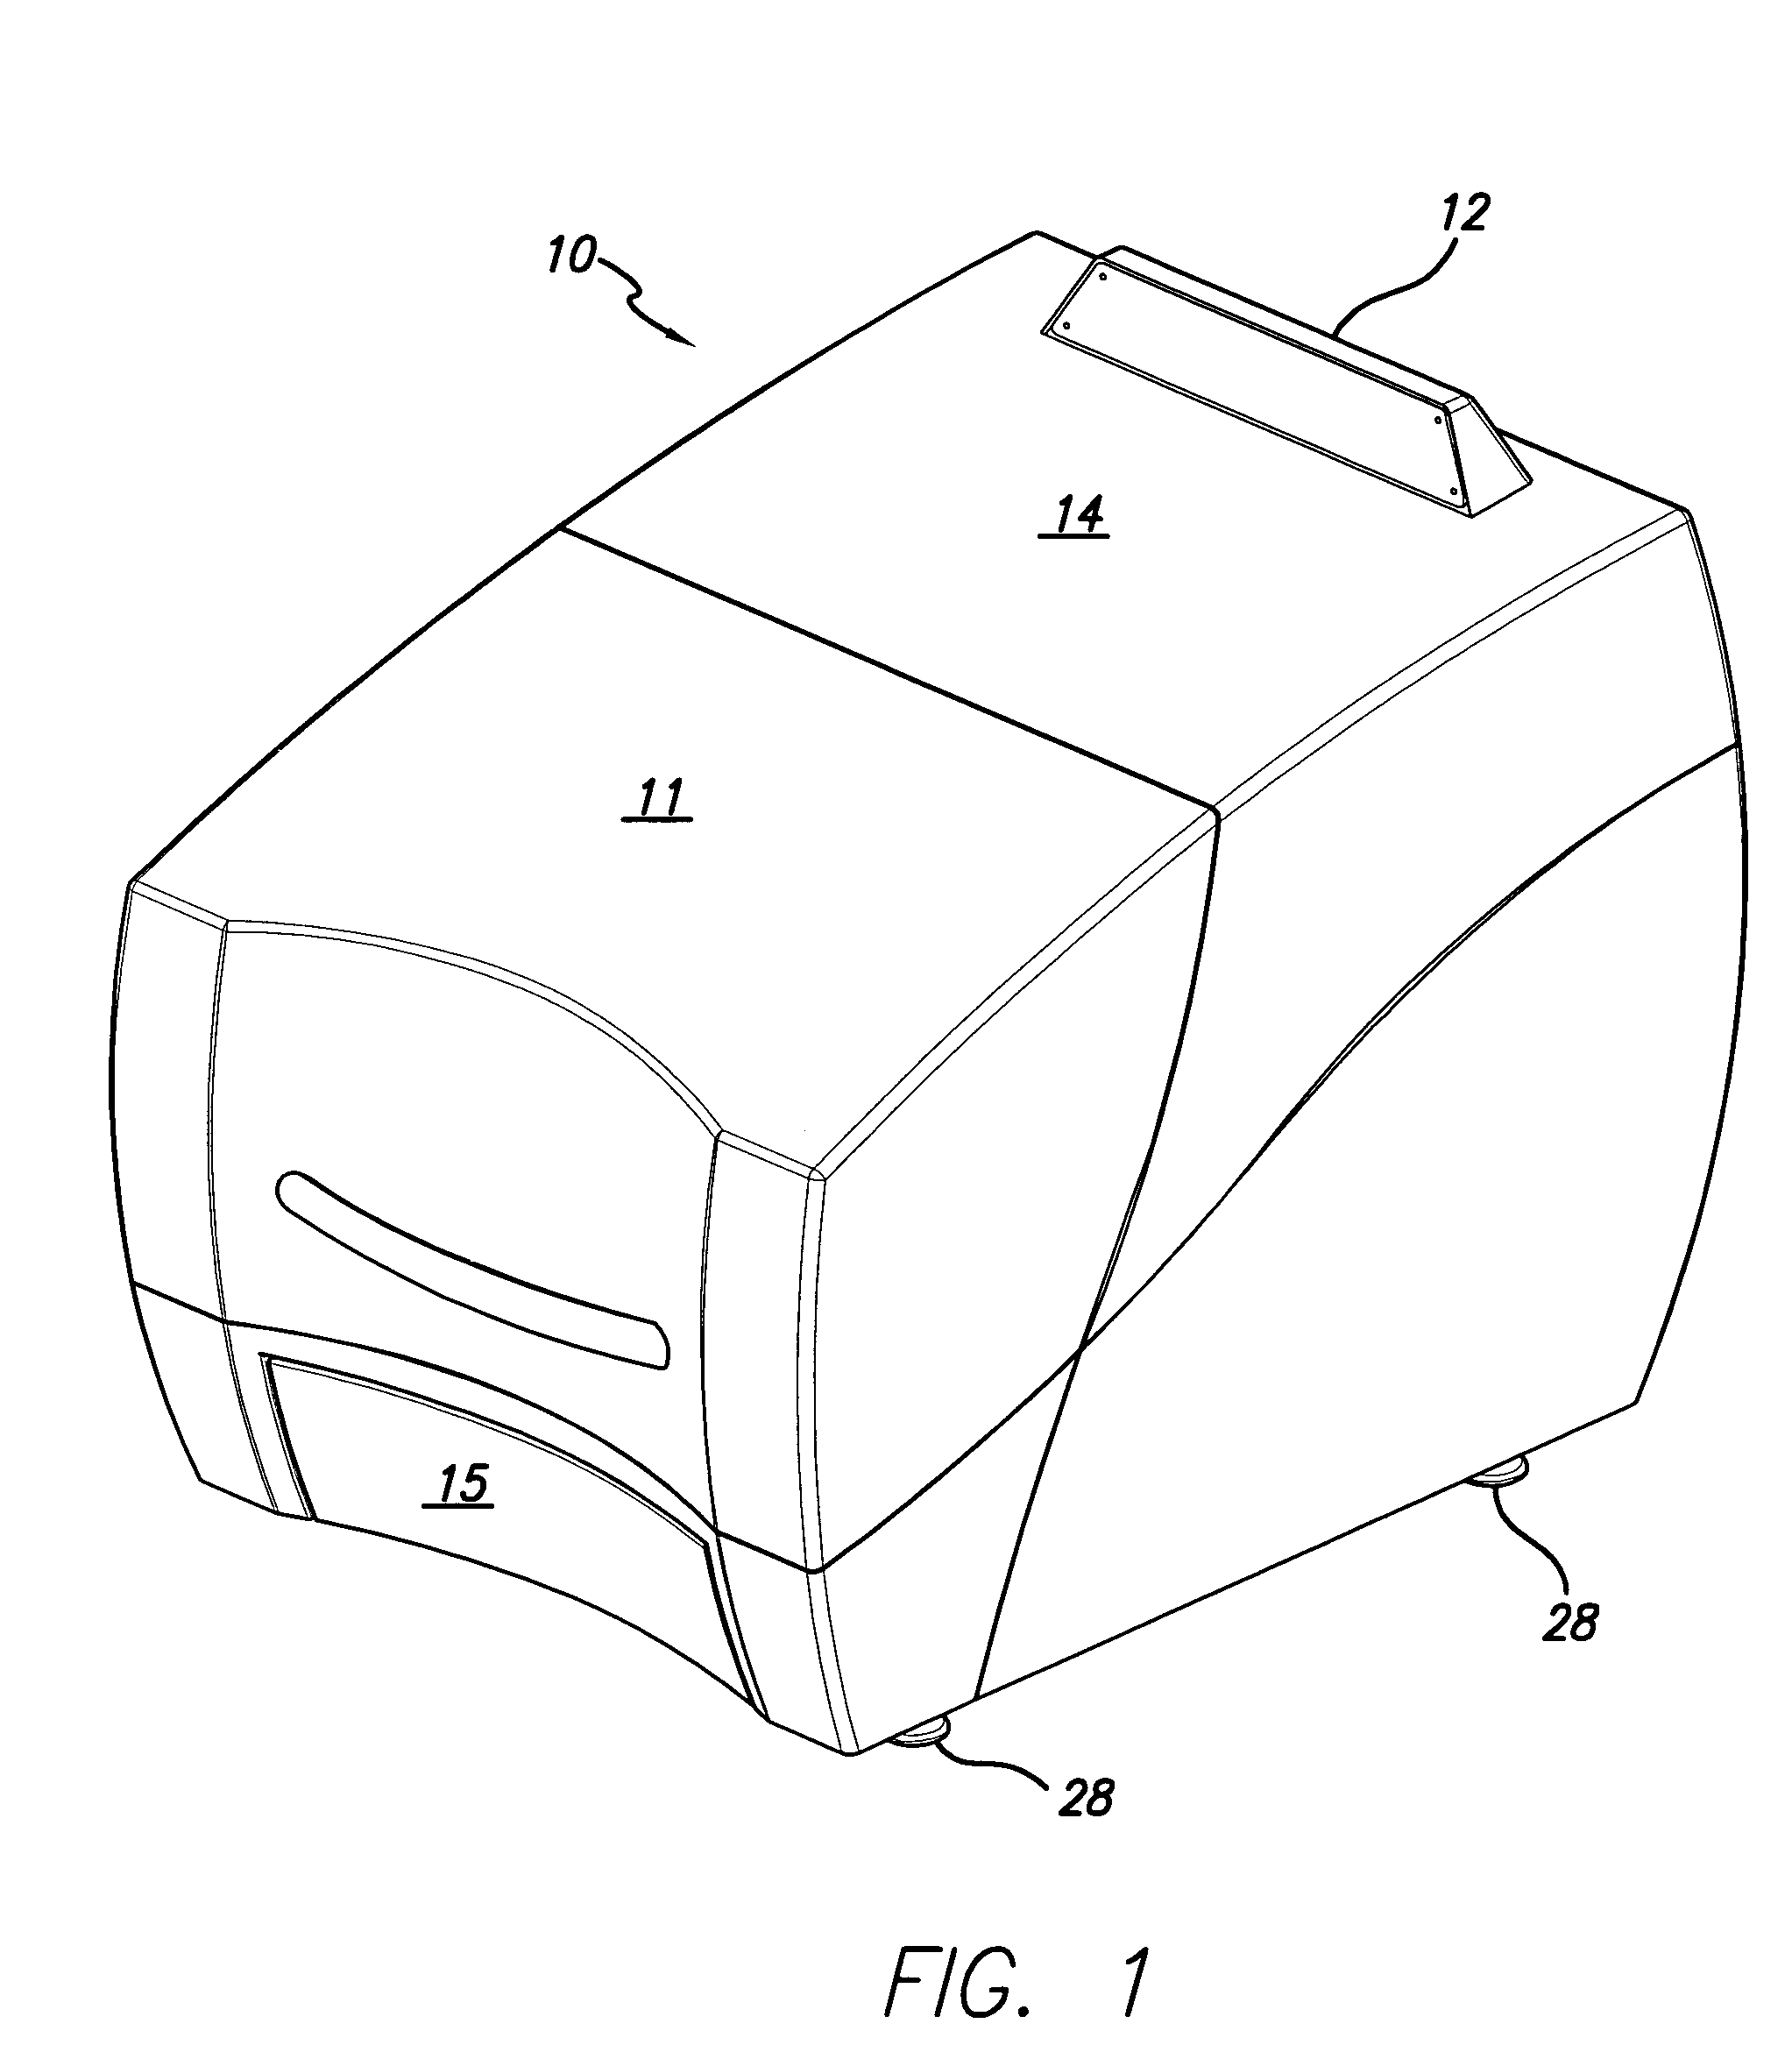 Post processor for three-dimensional objects